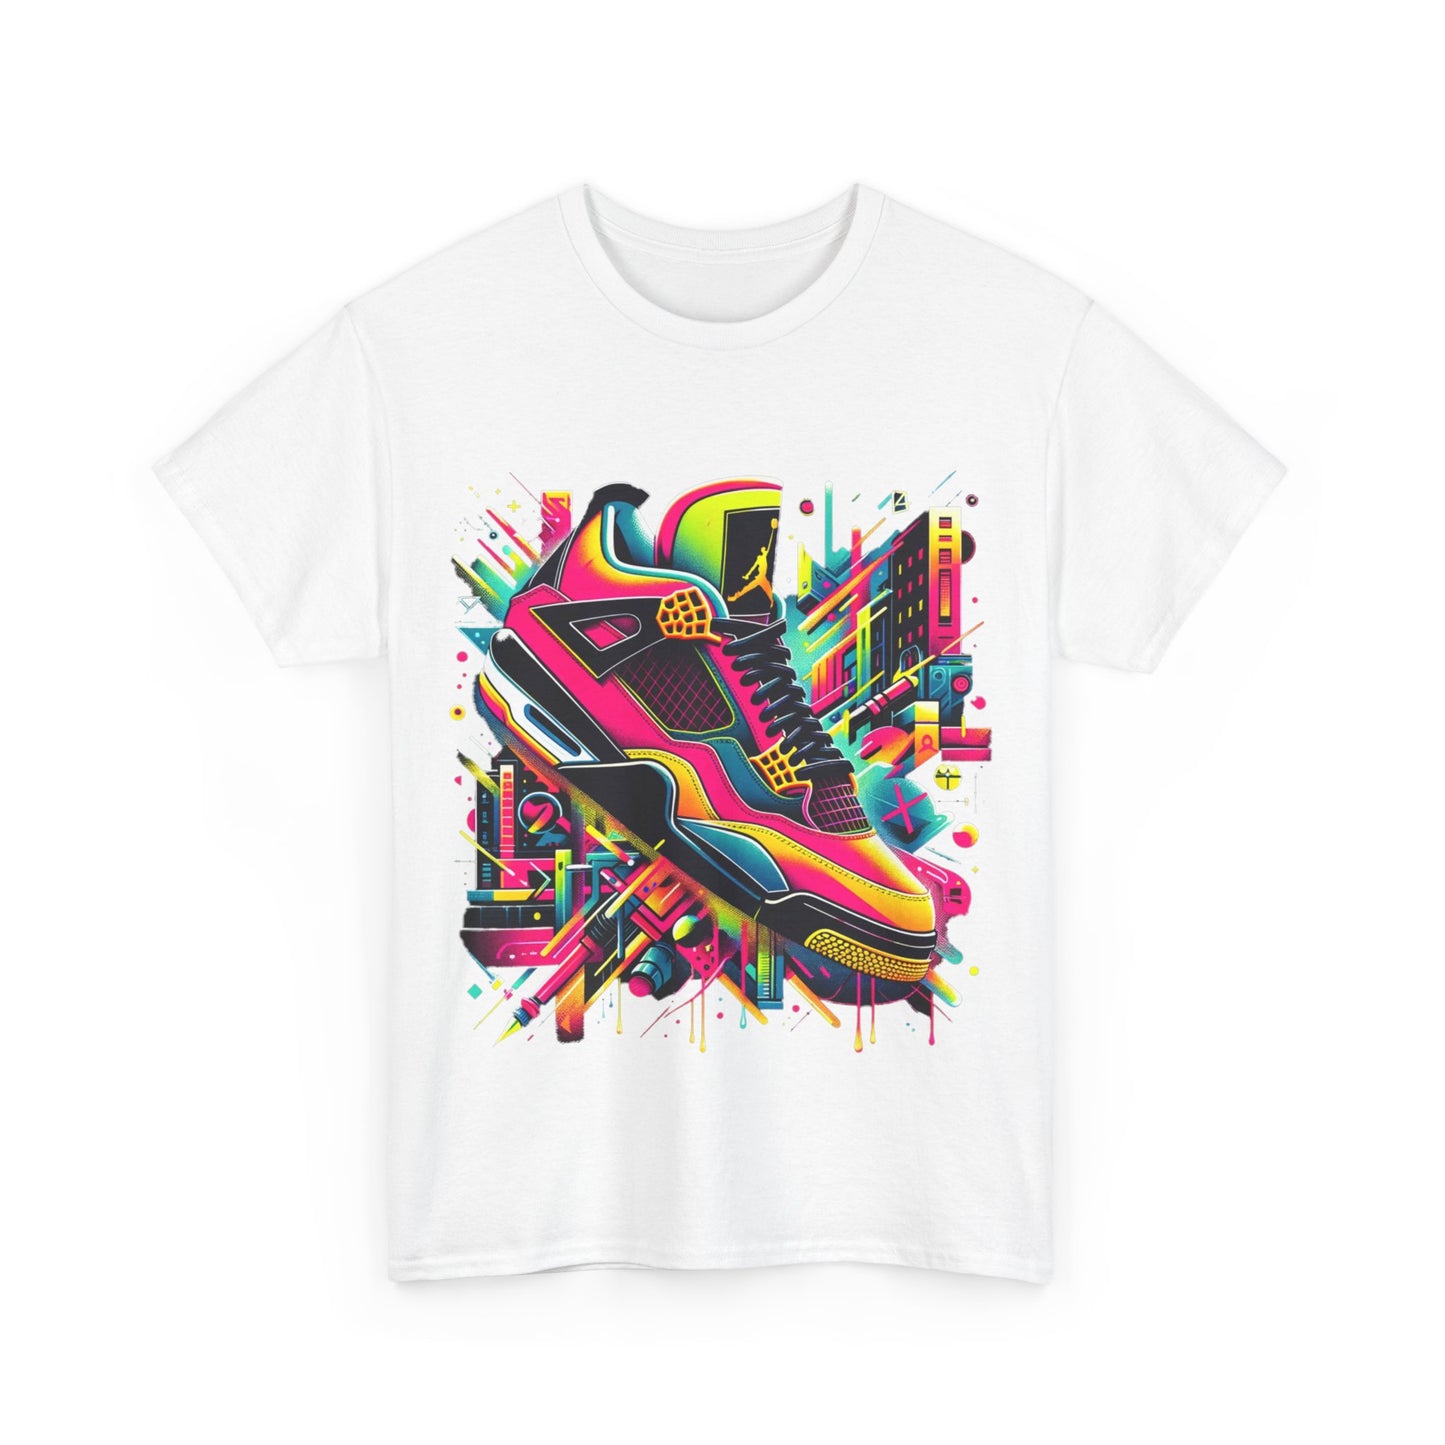 Y.M.L.Y. "Sneaker Culture" T-Shirt crafted with inspiration from the iconic Jordan 4 Retro Toro Bravo sneakers.